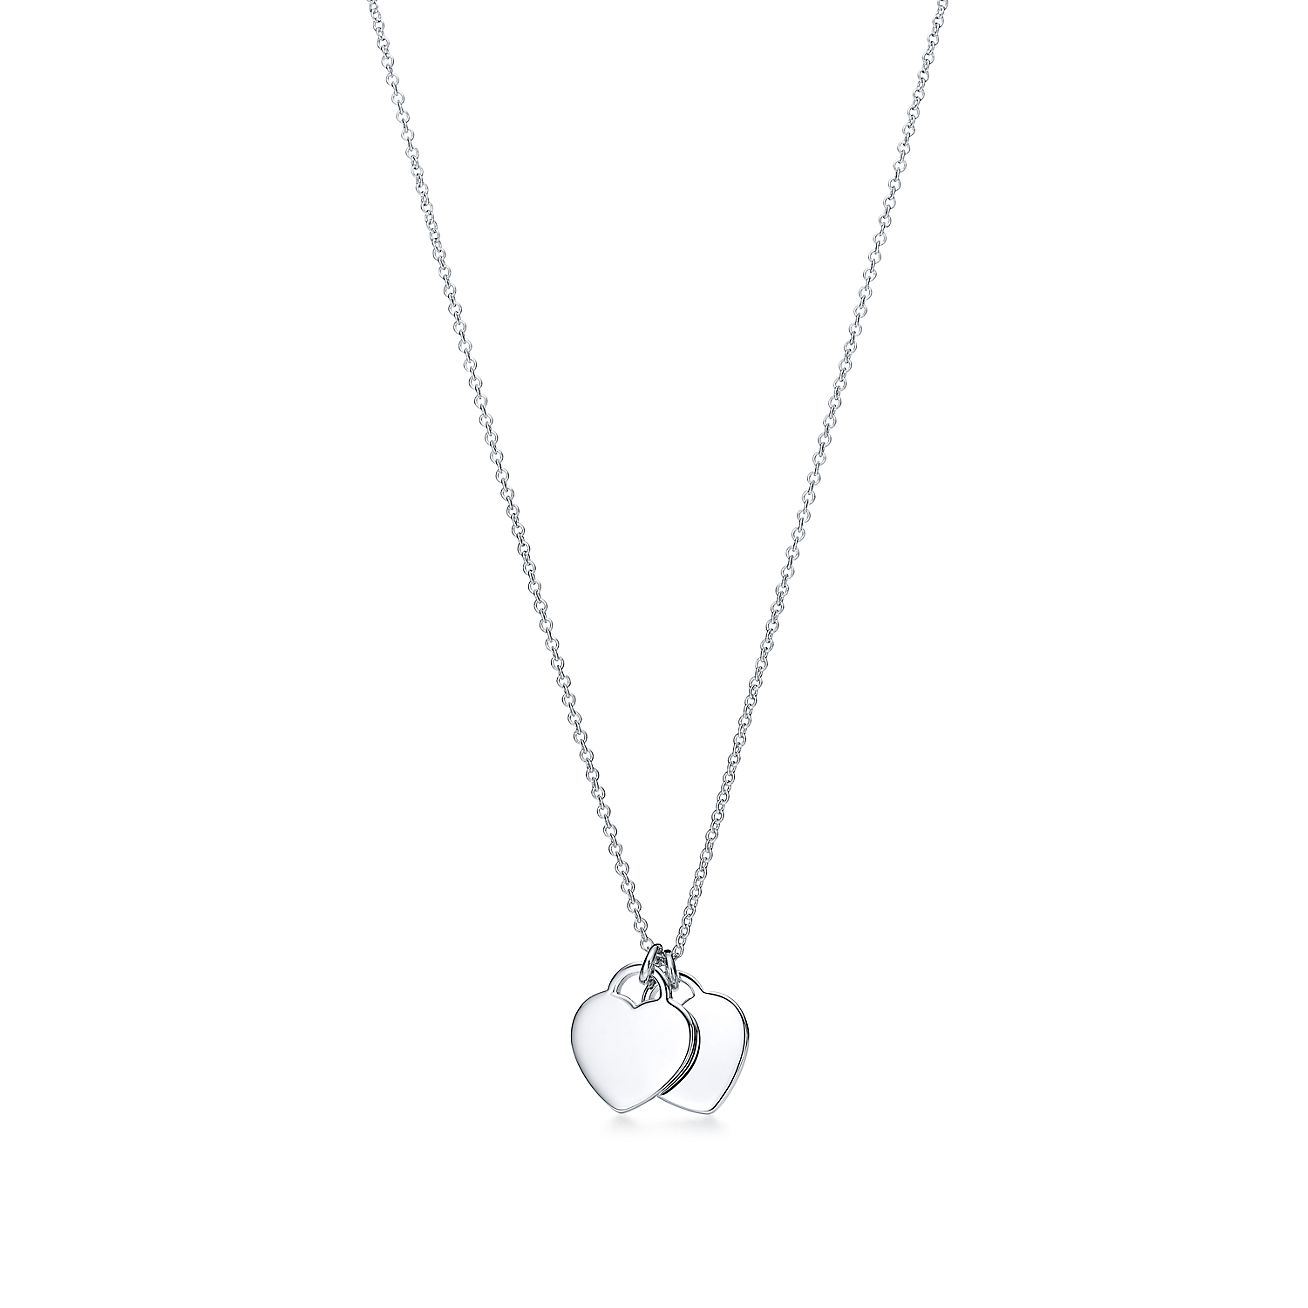 tiffany double heart necklace price